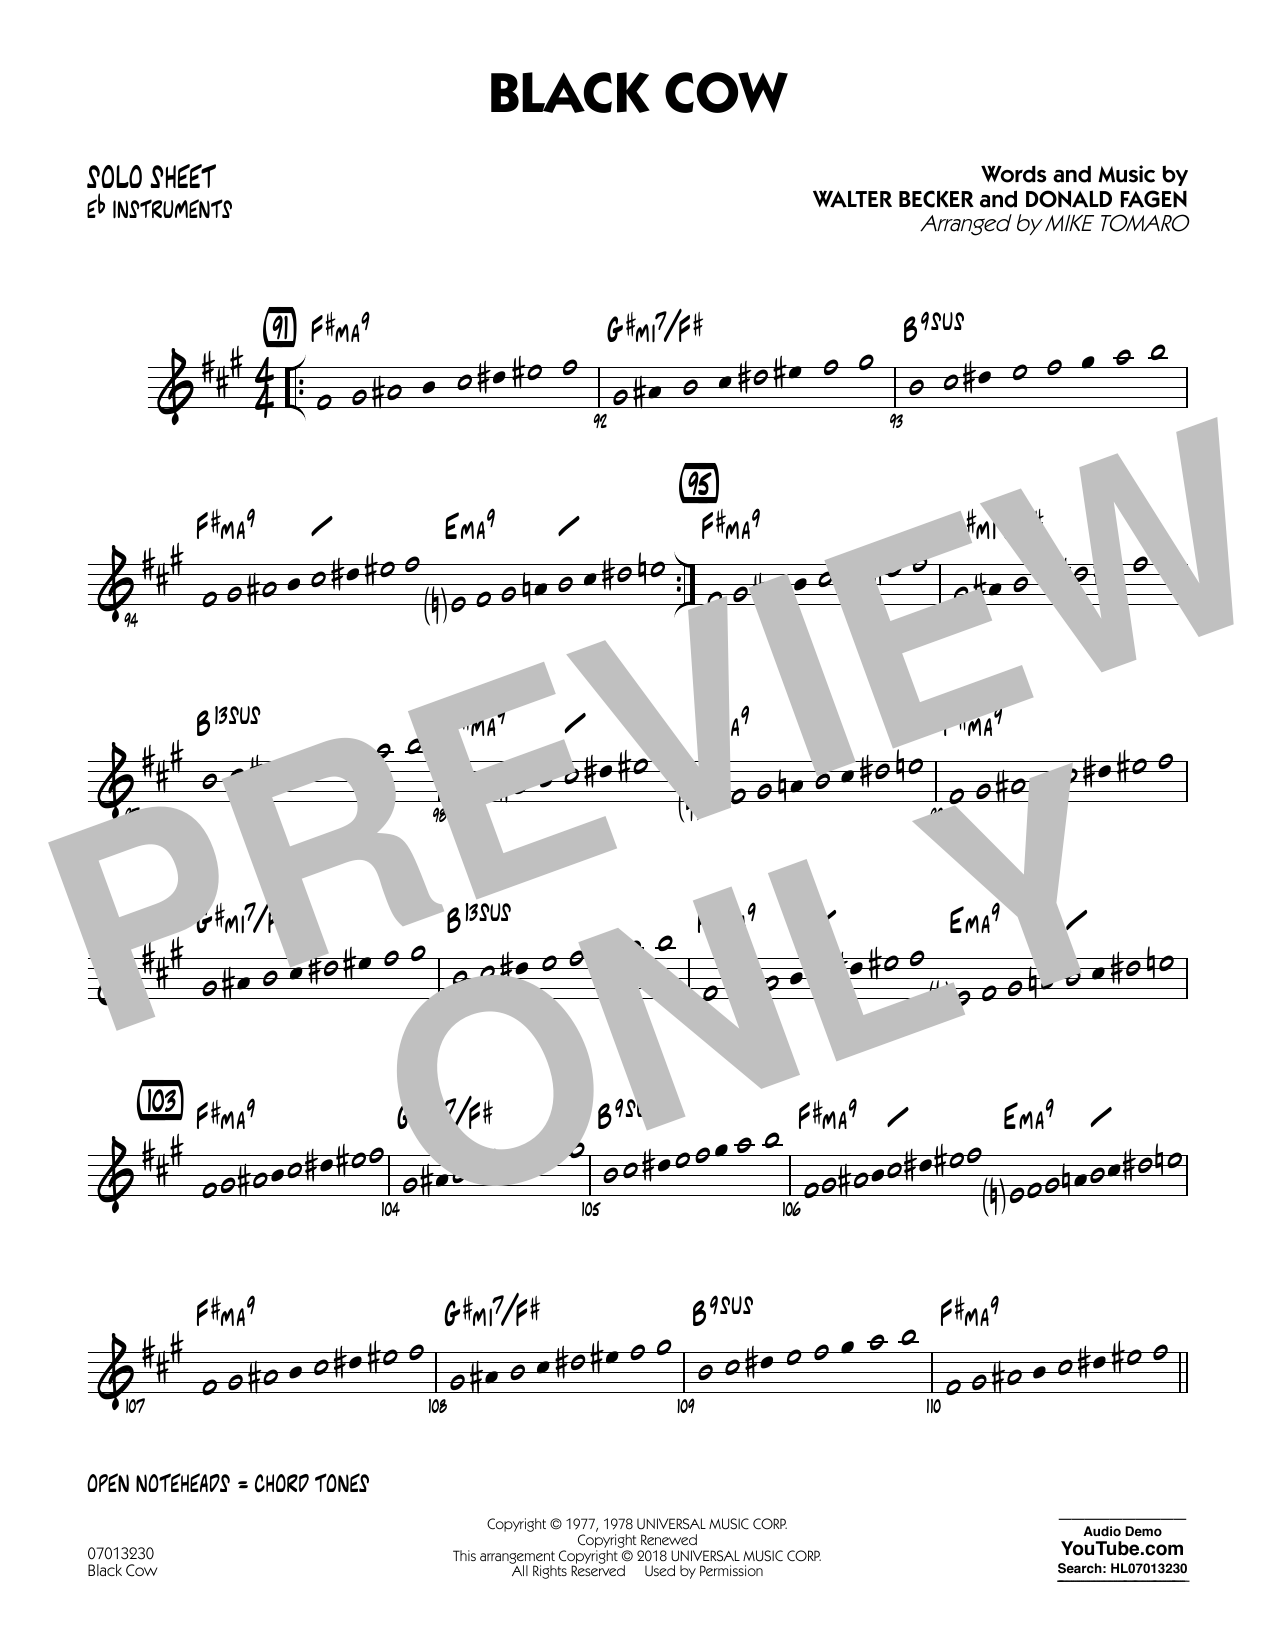 Download Steely Dan Black Cow (arr. Mike Tomaro) - Eb Solo Sheet Music